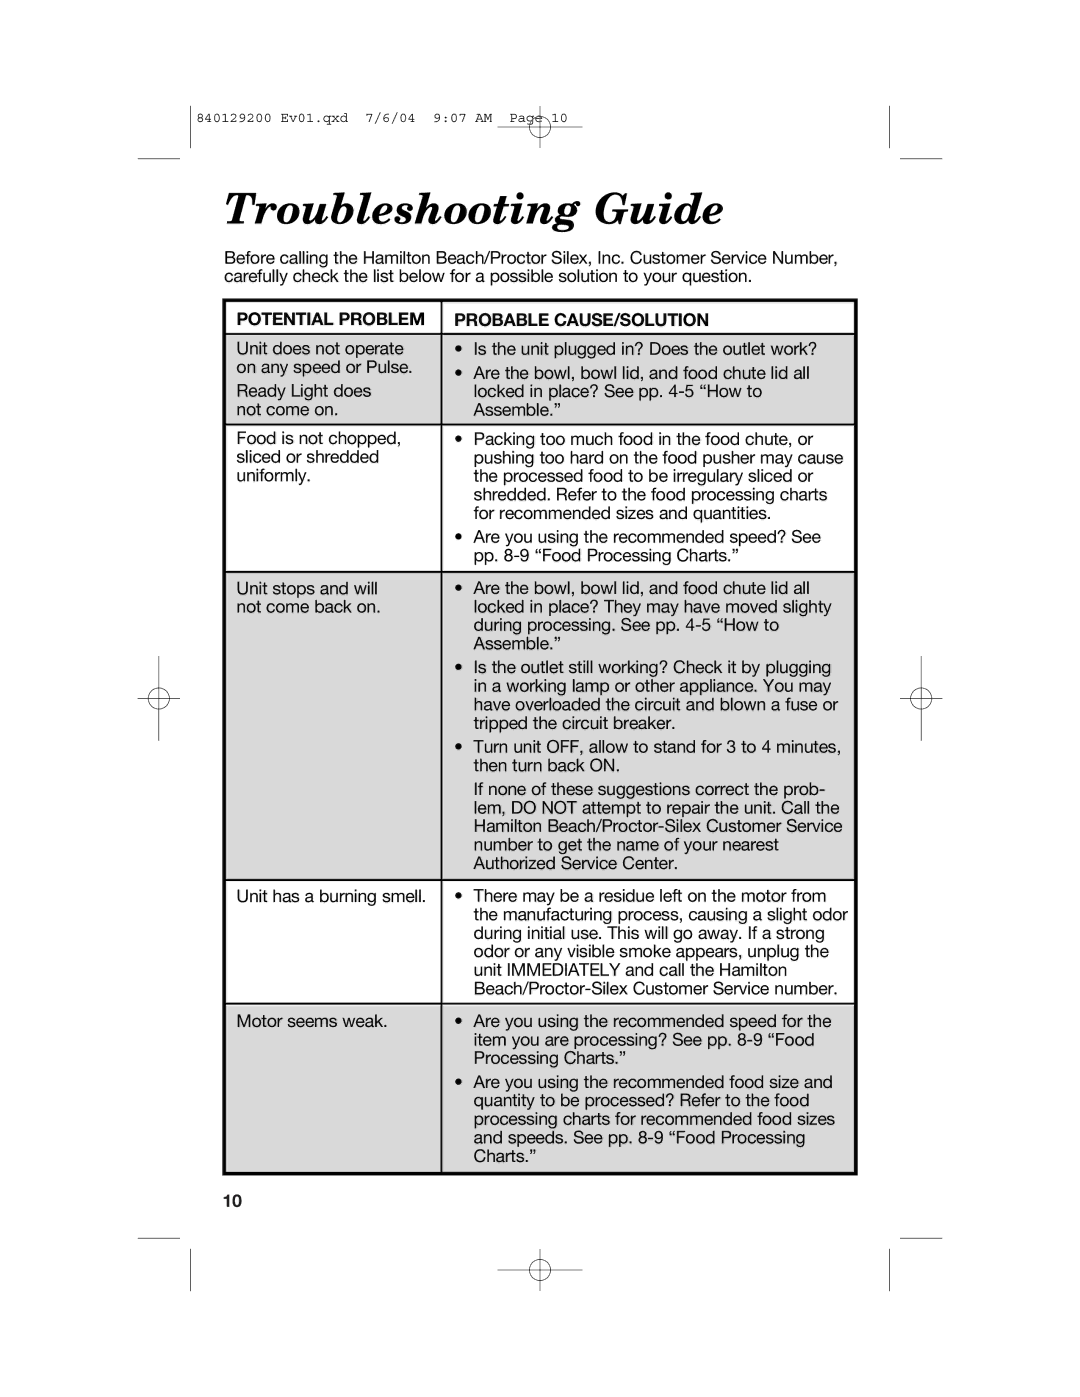 Hamilton Beach 70590C manual Troubleshooting Guide, Potential Problem Probable CAUSE/SOLUTION 